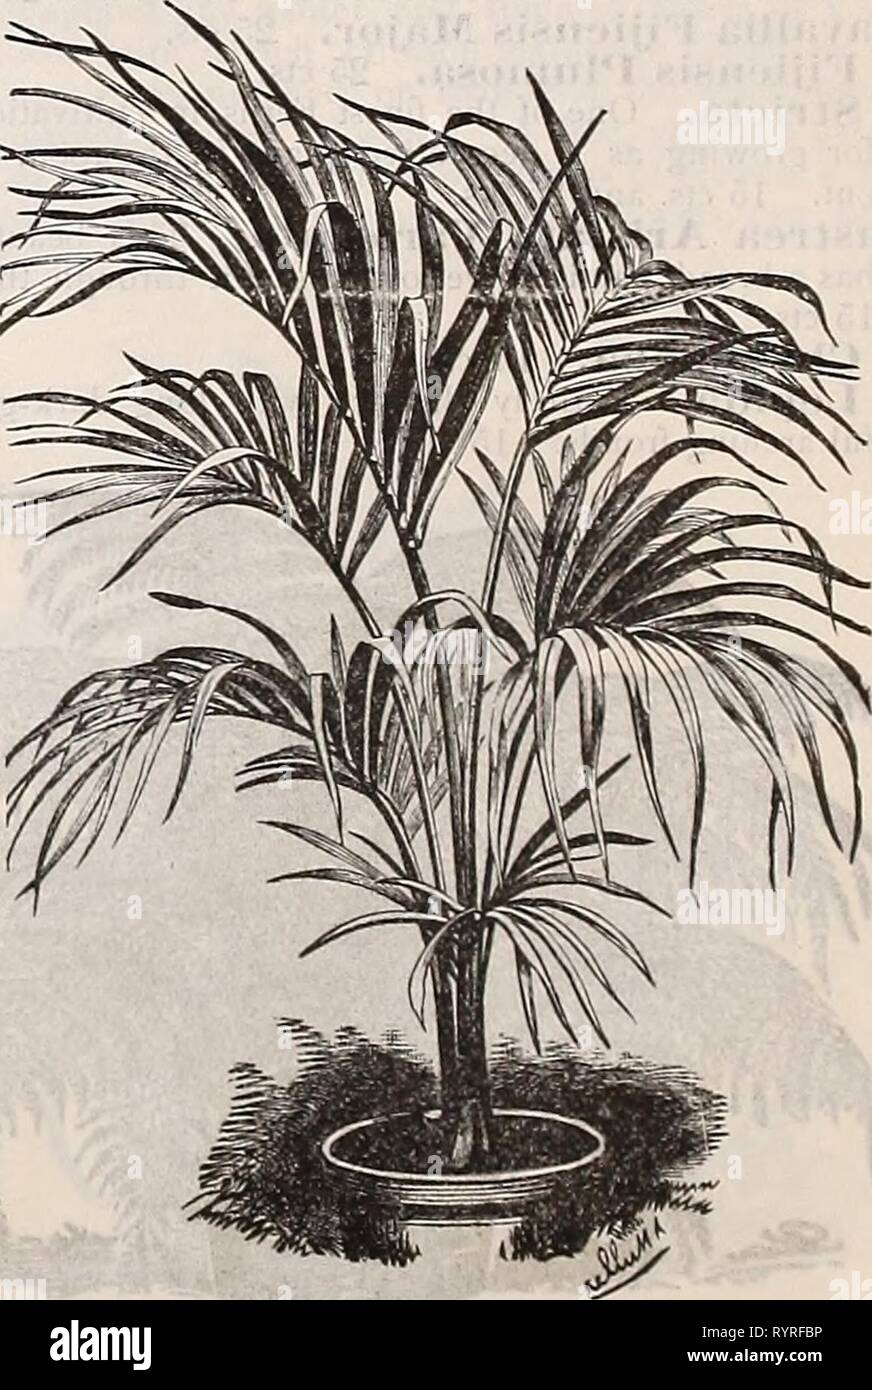 Dreer's mid-summer catalogue 1900  Dreer's mid-summer catalogue 1900 : pot grown strawberry plants seasonable plants seeds & sundries . dreersmidsummerc1900henr Year: 1900  ARECA BAUERI. Similar in general habit to Seaforthea Elegans, but hardier and with darker foliage and stems; 5-inch pots, 18 inches high. $1.00 each. ARECA VERSCHAFFELTII. A beautiful species with large pinnate leaves of a light green with creamy mid-rib and stems, while the trunk is bronzy pur- ple; 3-inch pots, 12 inches high. 50 cts. each. CALAMUS INTERMEDIUS. A tropical species, delighting in a high, moist atmosphere, f Stock Photo